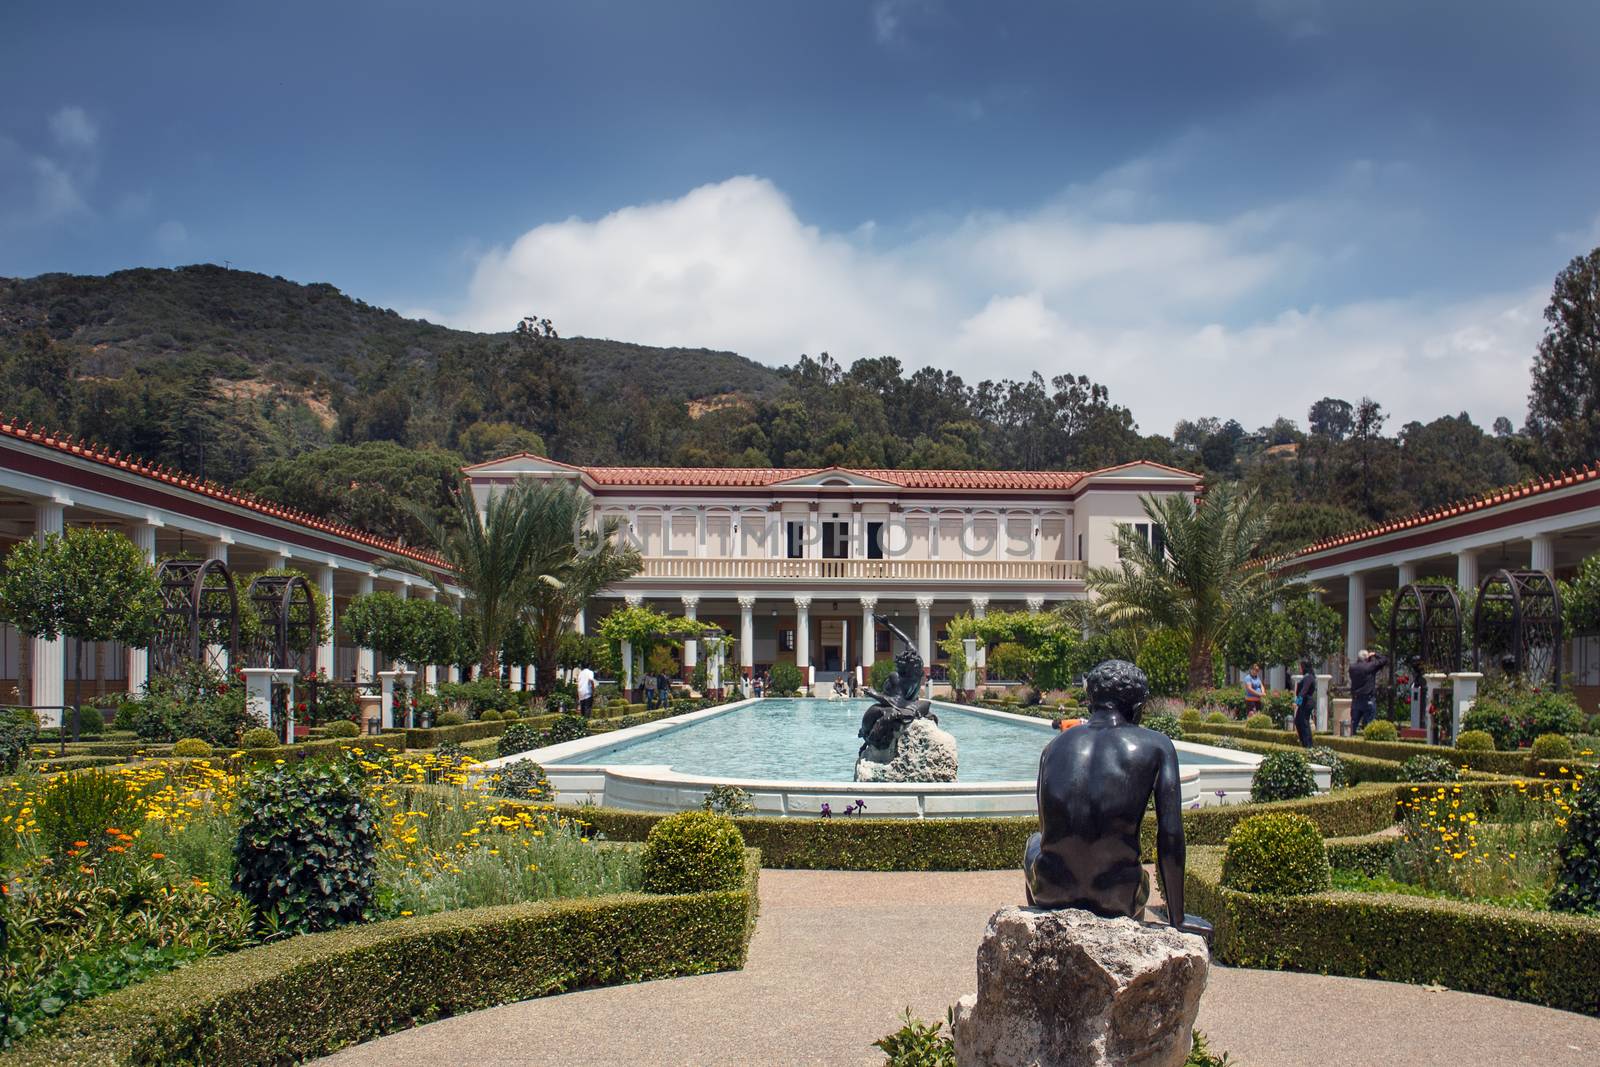 LOS ANGELES, USA - May 25: The famous Getty Villa on May 25, 2009 in Los Angeles. The design of the Getty Villa was inspired by ancient blueprints of the Villa of the Papyri at Herculaneum.